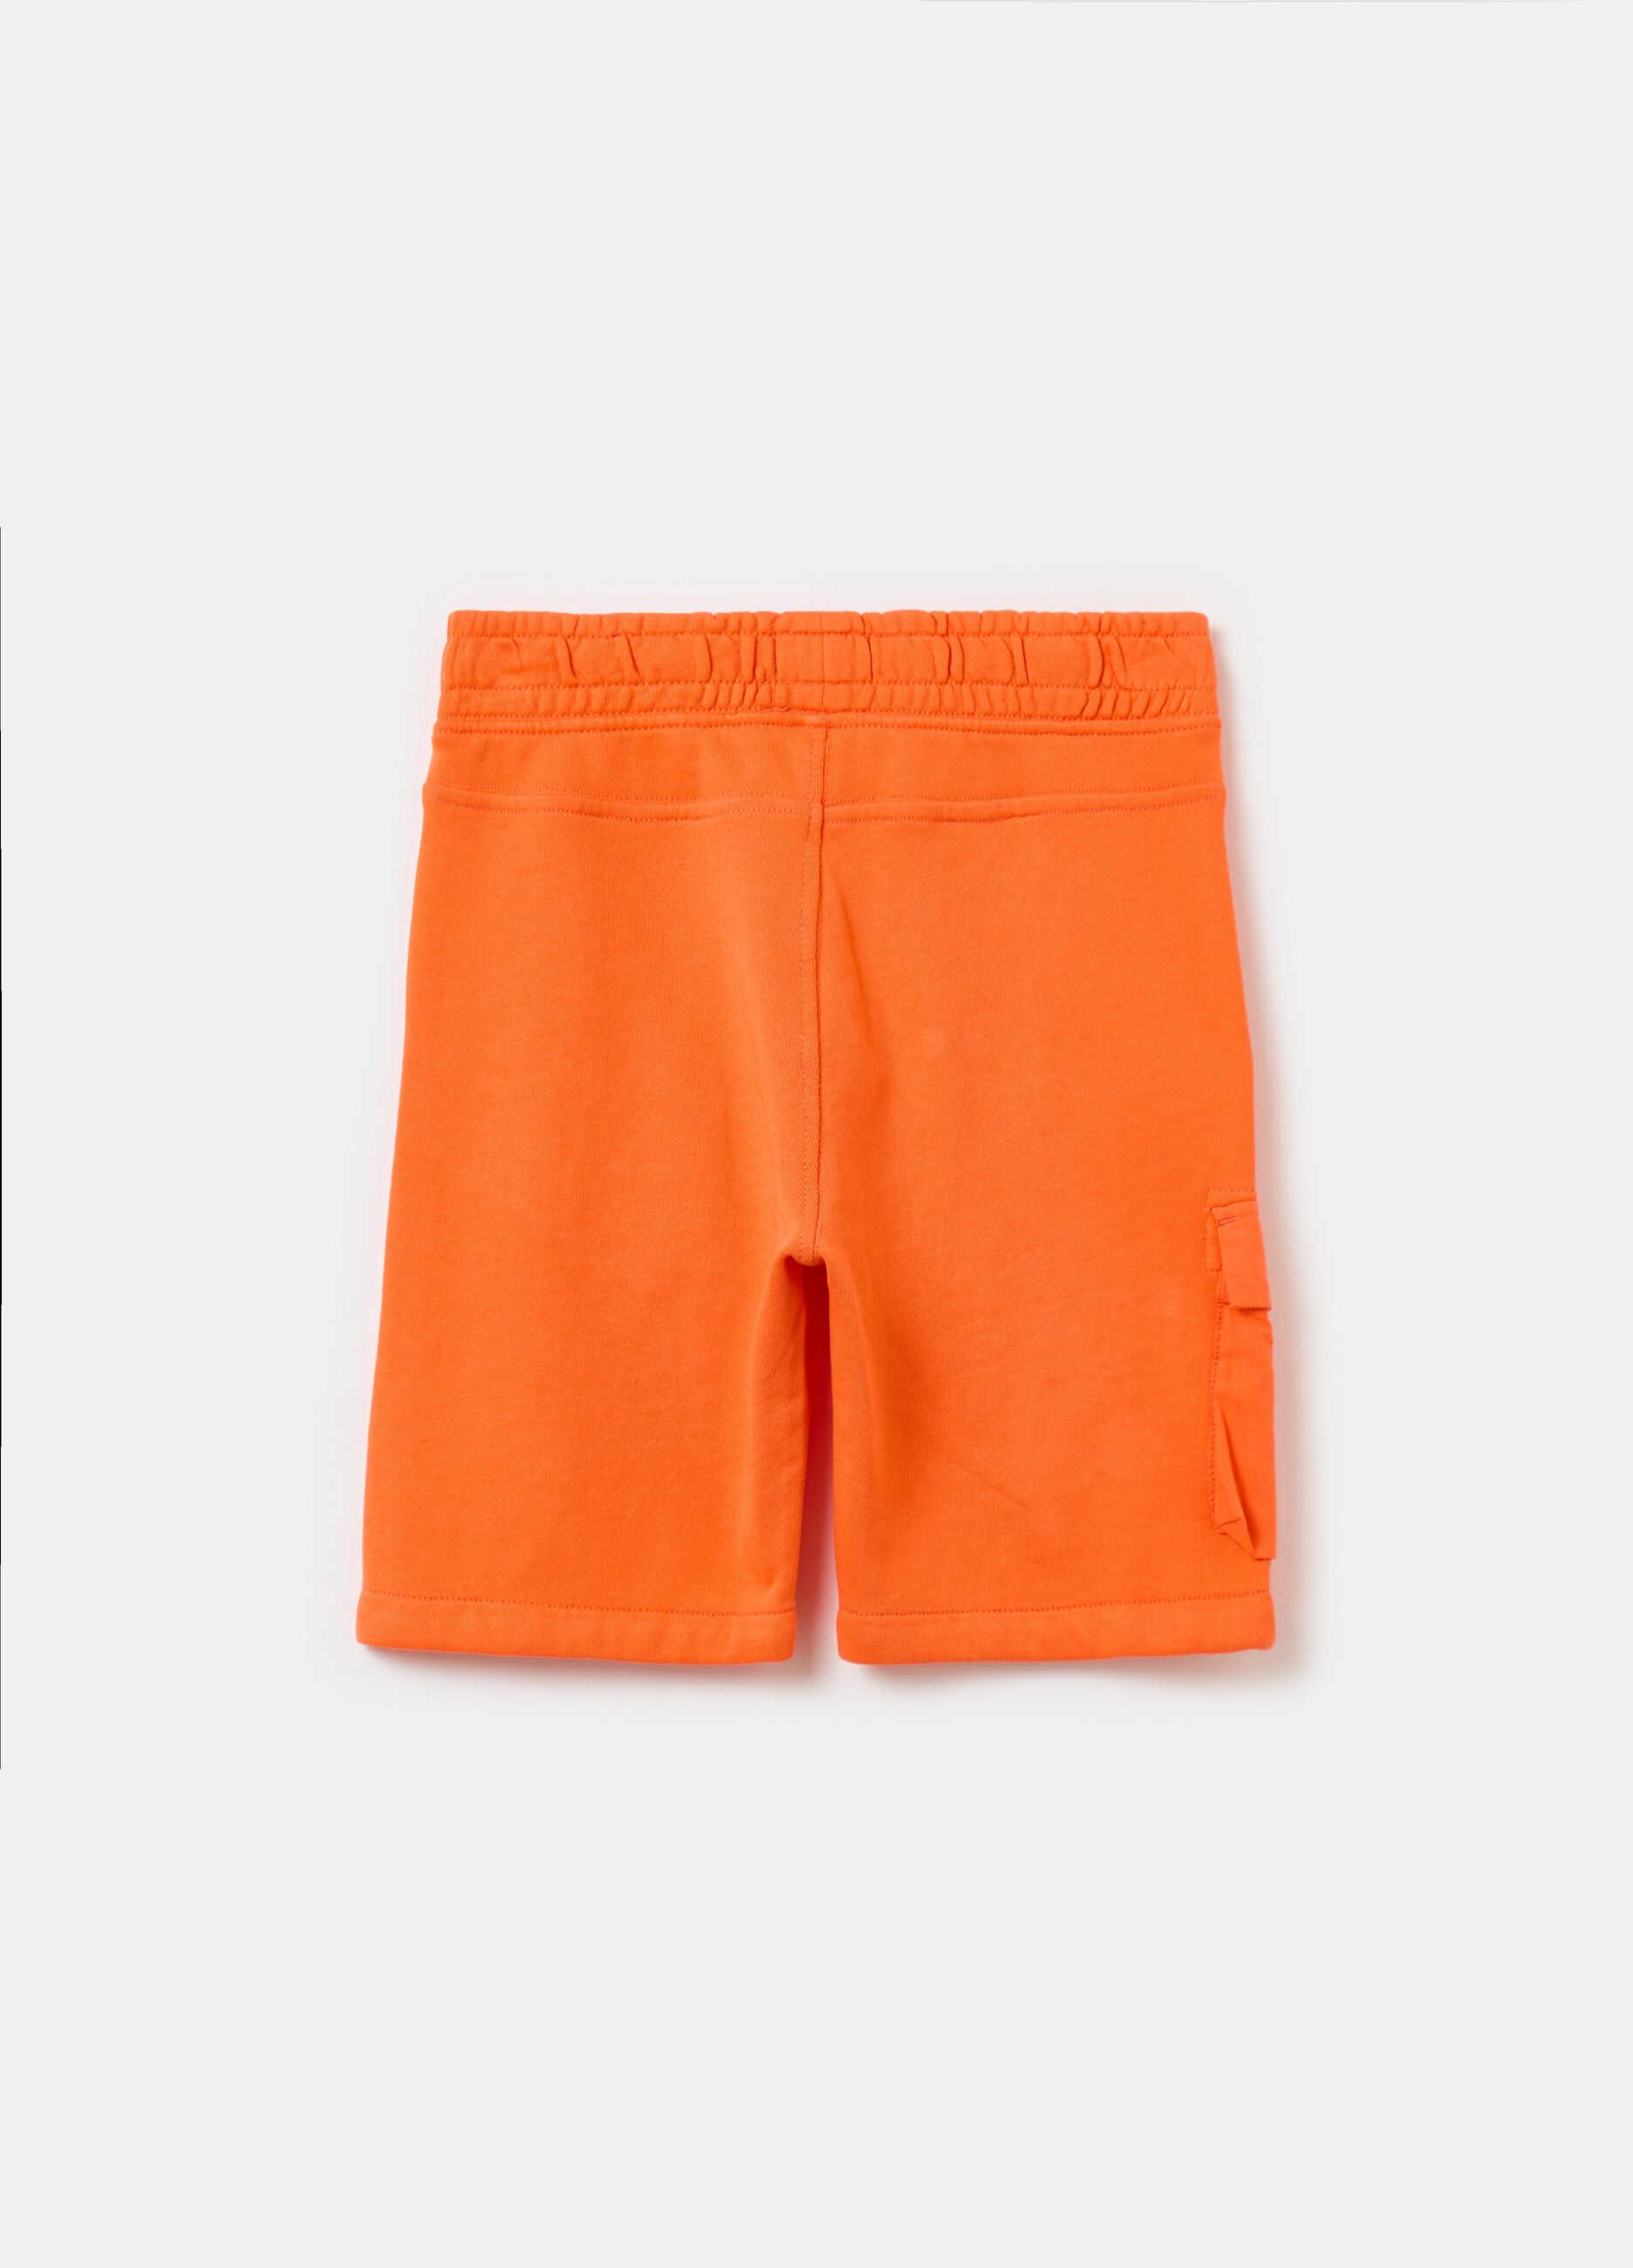 French Terry shorts with drawstring